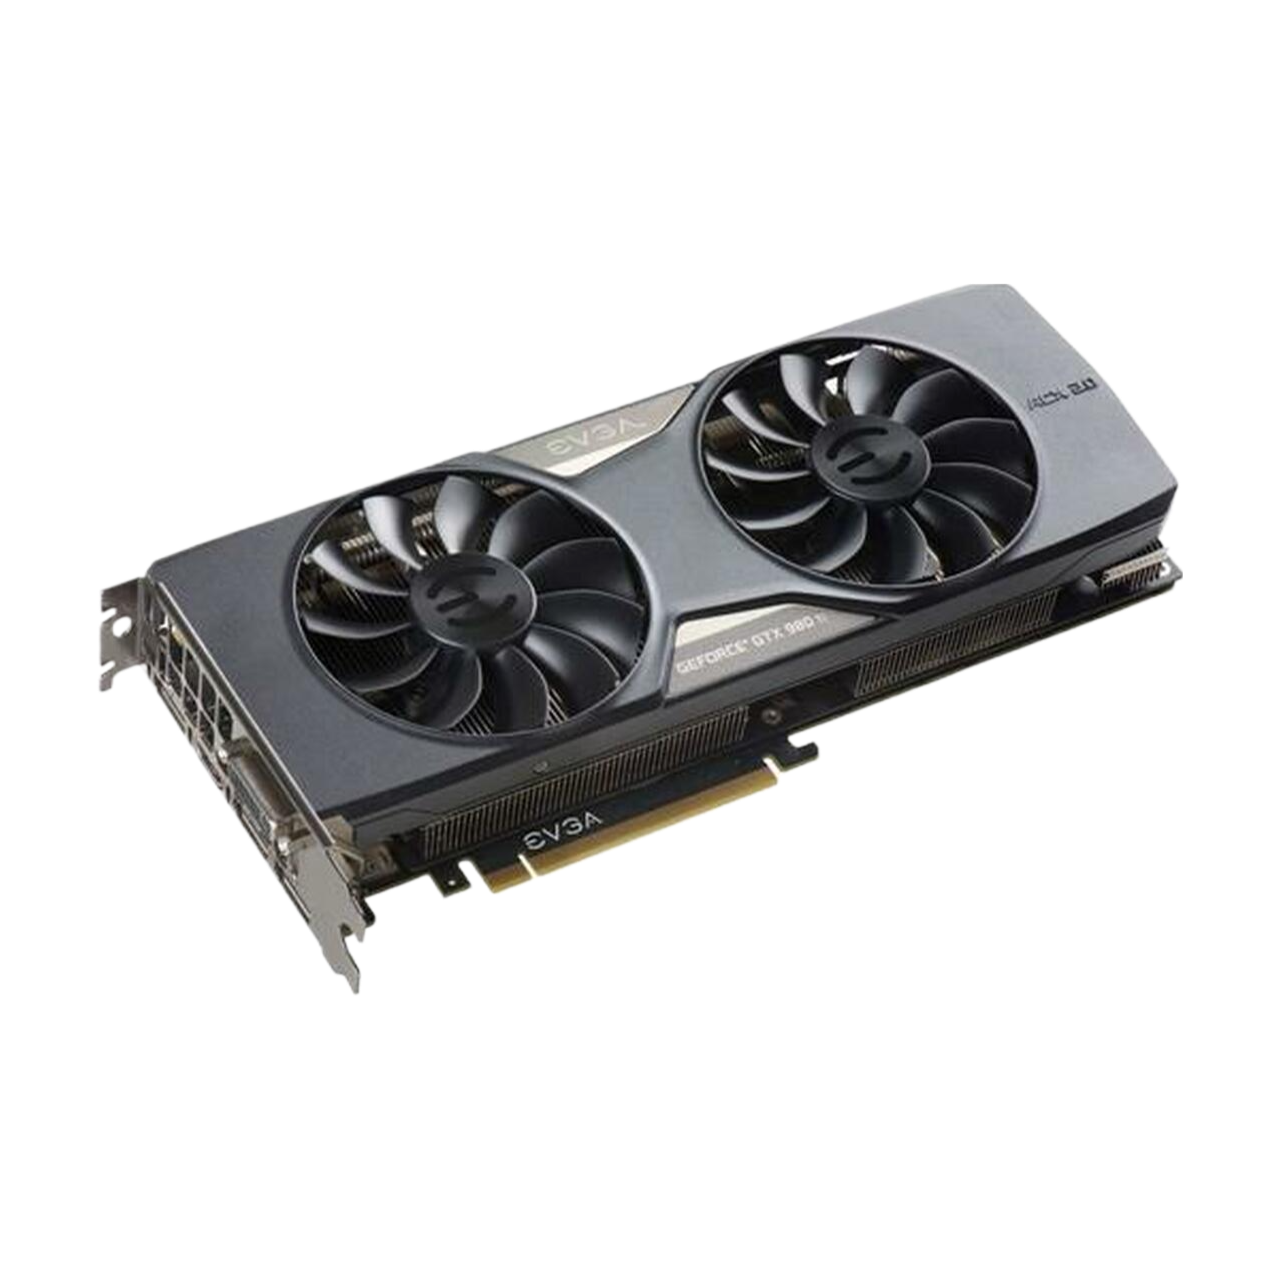 EVGA GeForce GTX 980 Ti 6GB FTW GAMING w/ACX 2.0+ Whisper Silent Cooling w/ Free Installed Backplate Graphics Card 06G-P4-4996-KR